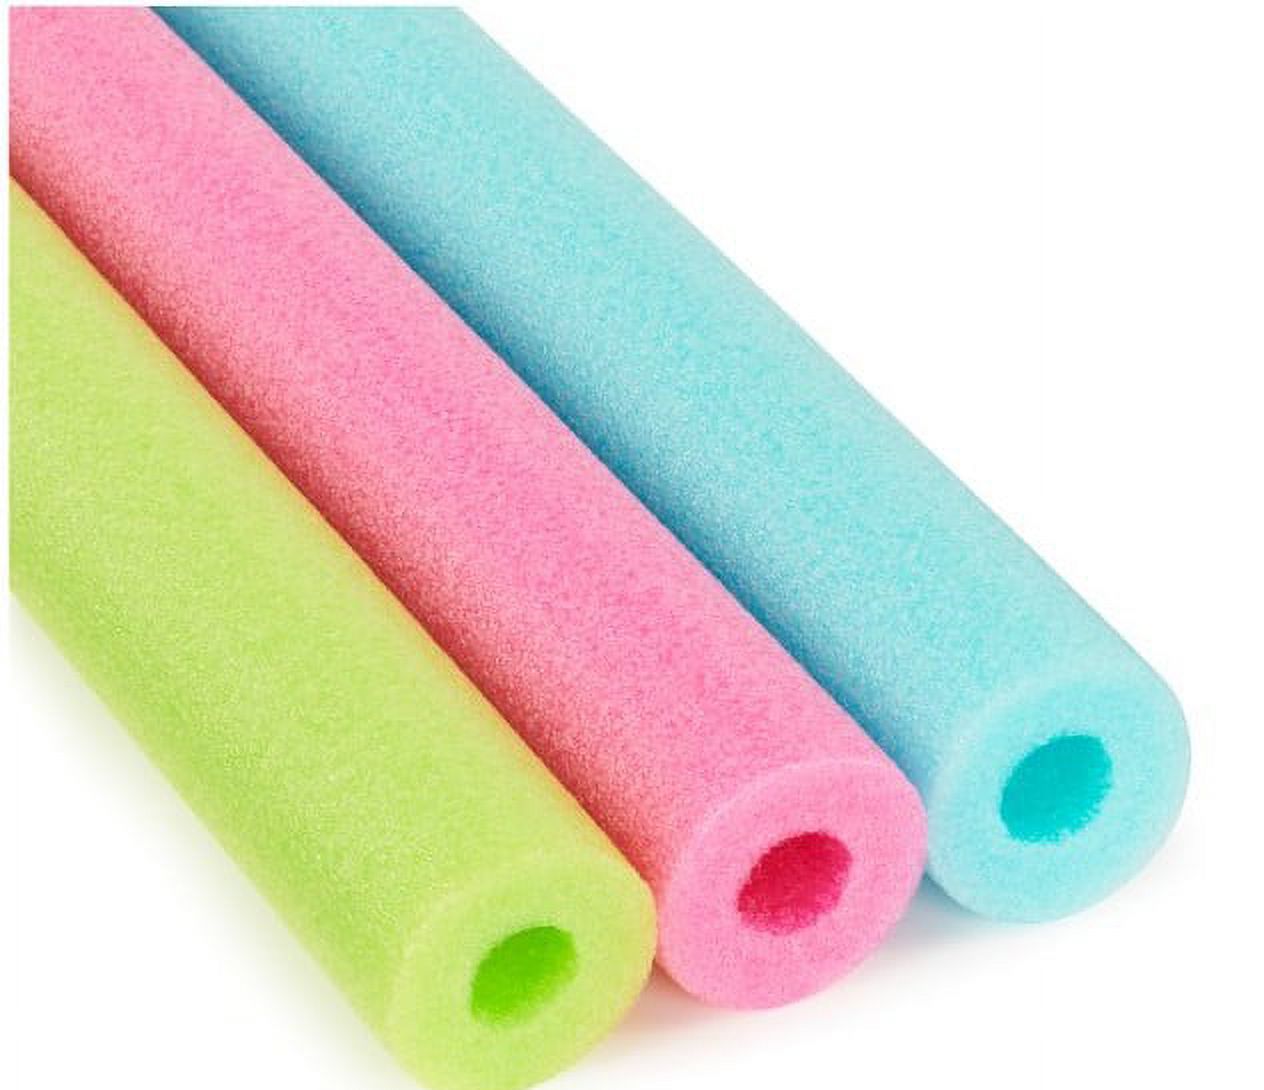 Big Joe Super Foam Swimming Pool Noodle (Styles May Vary), For Boys & Girls Ages 5+ - image 2 of 3